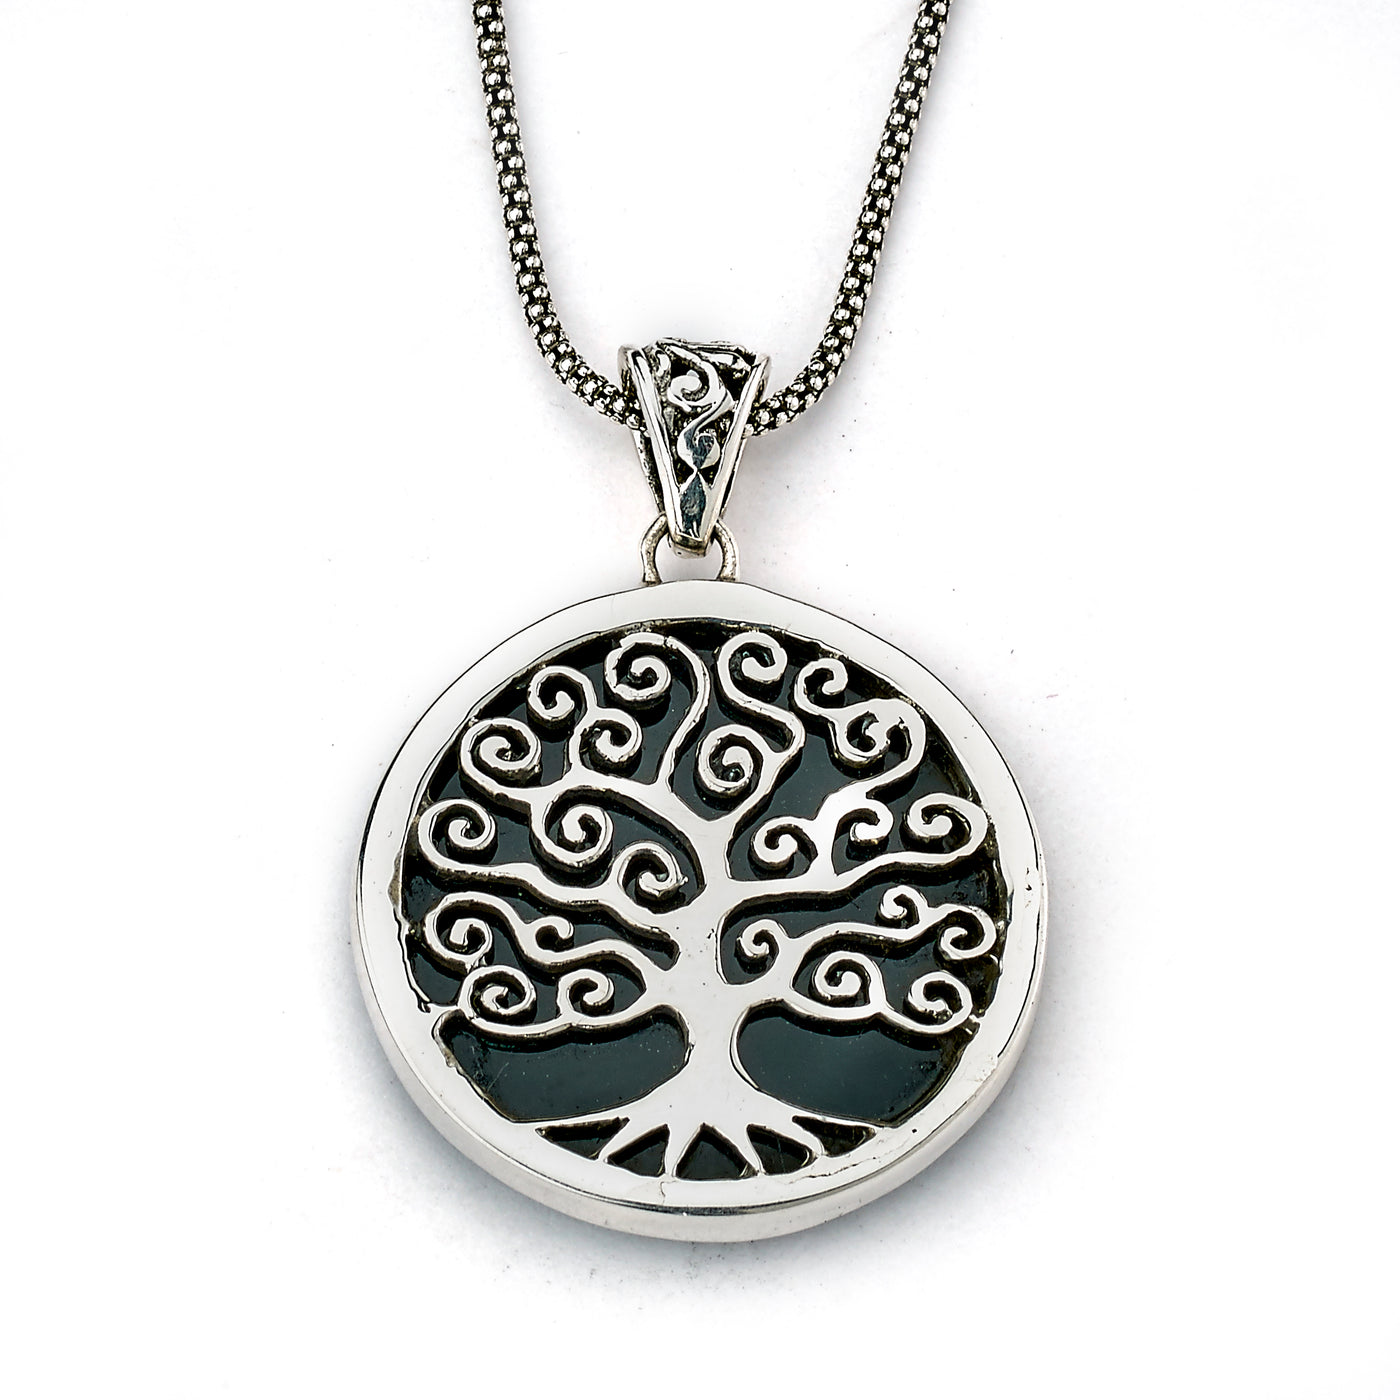 SS ROUND BLACK SHELL PENDANT WITH TREE DESIGN 18IN